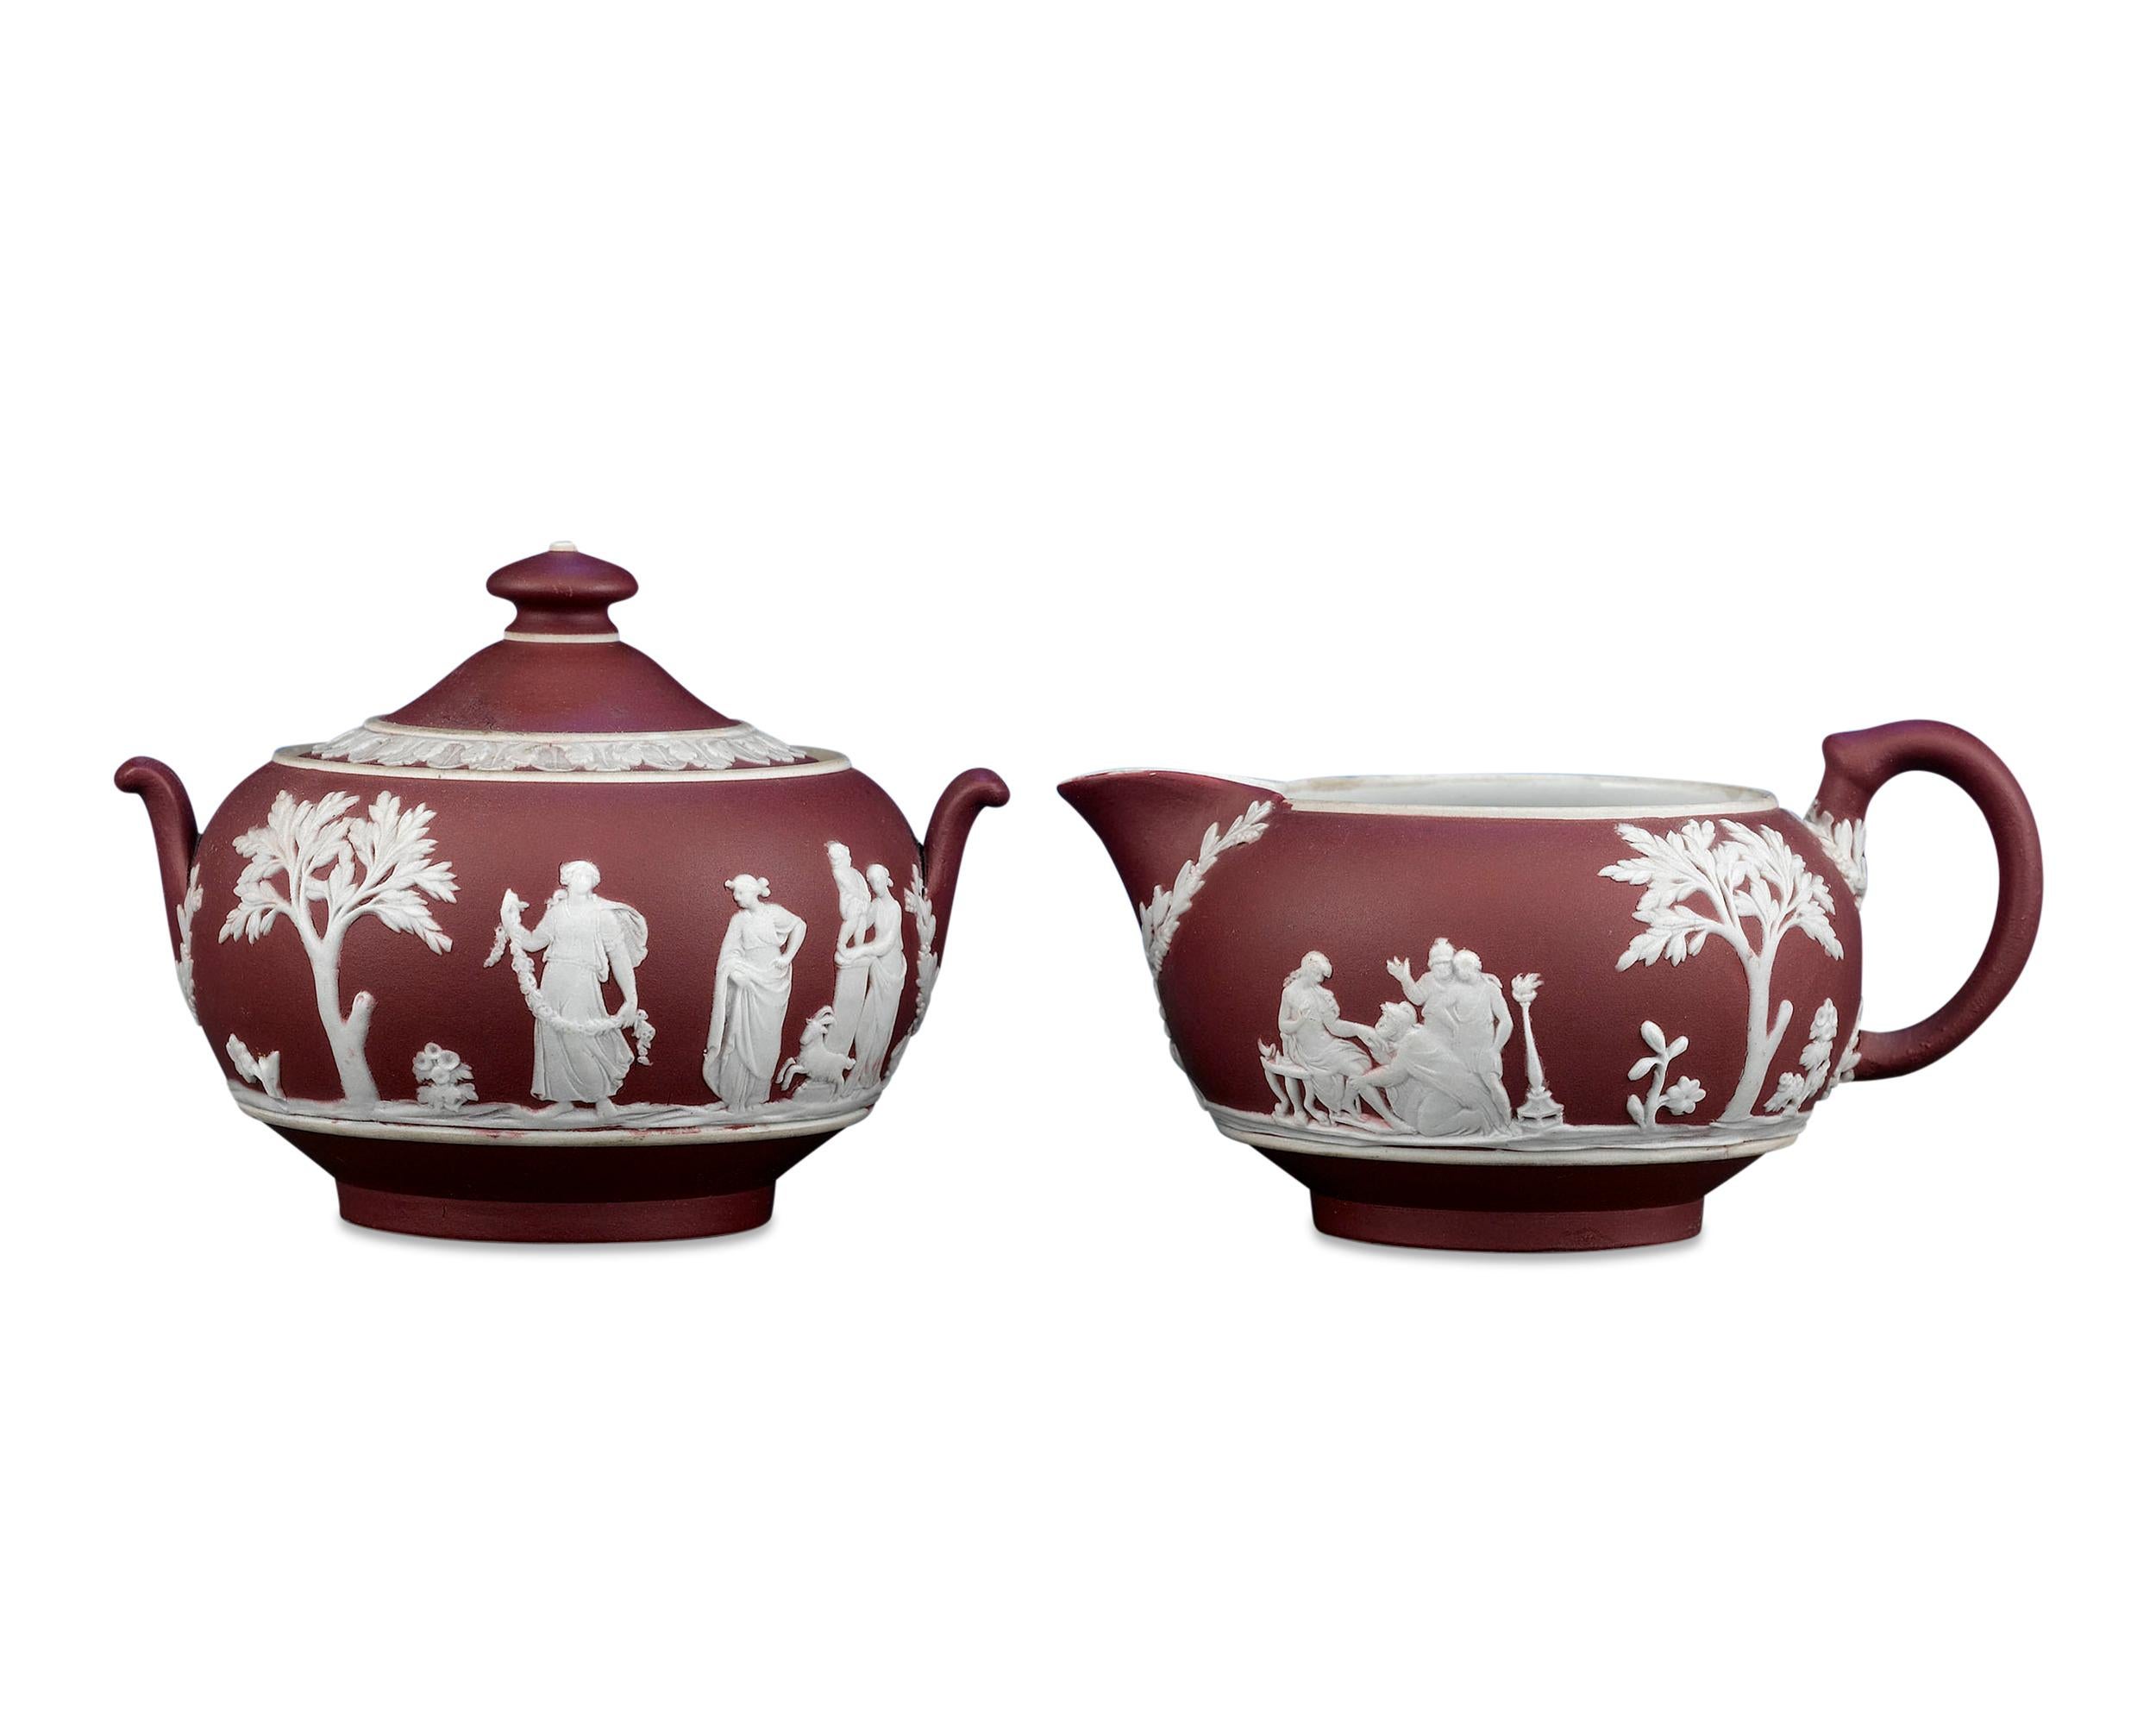 This beautiful jasper dip creamer and sugar bowl set is the work of the famed Wedgwood and exhibits the company's rare crimson hue. Crafted in the classical taste, both pieces in this elegant set are adorned with white classical figures applied in